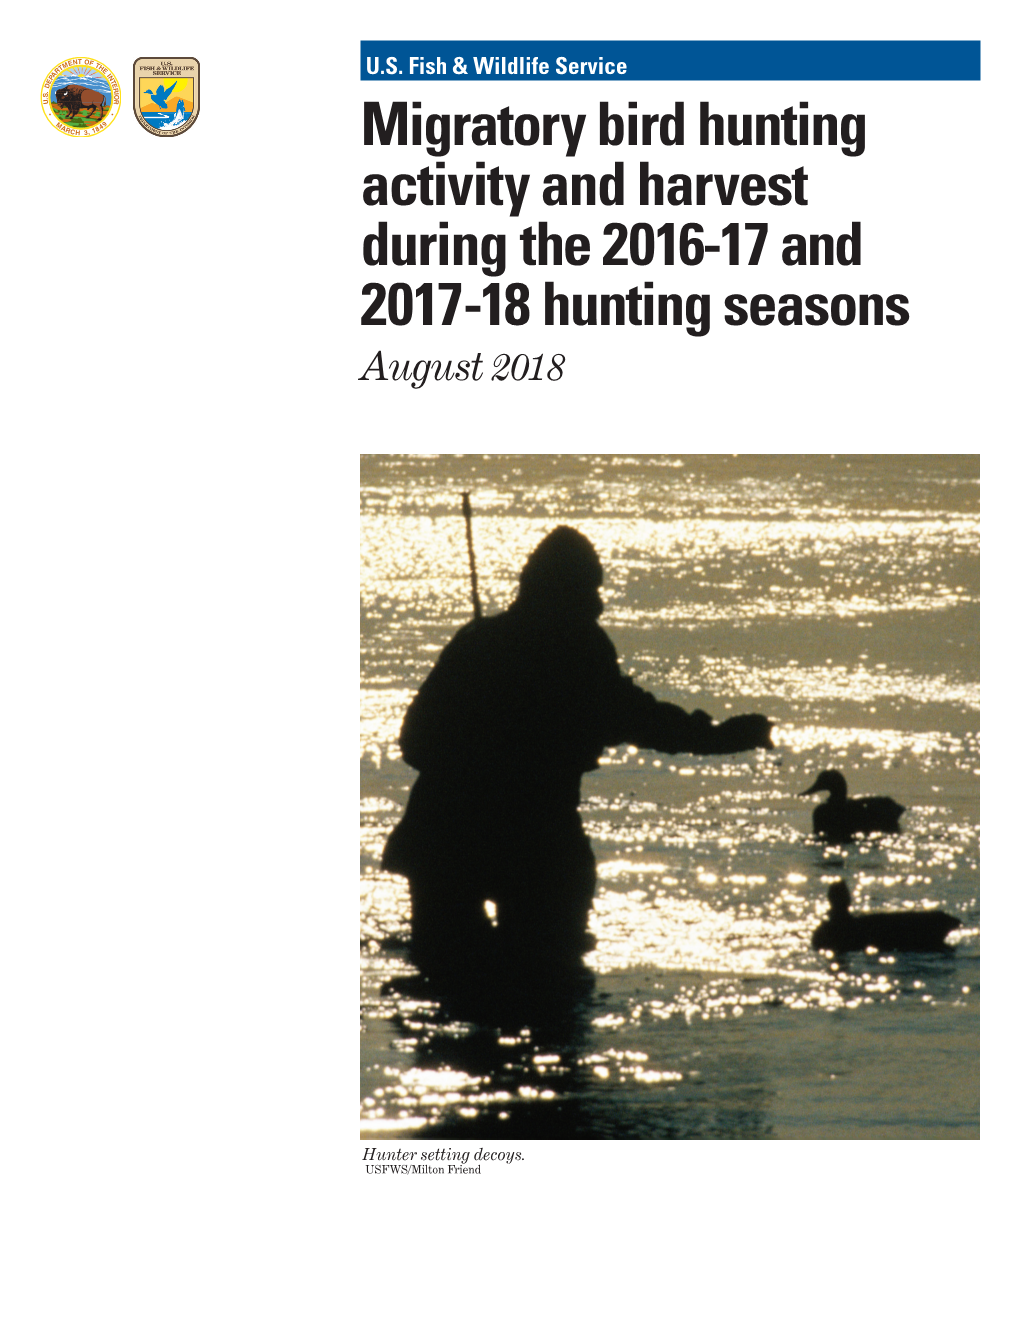 Migratory Bird Hunting Activity and Harvest for the 2016-17 and 2017